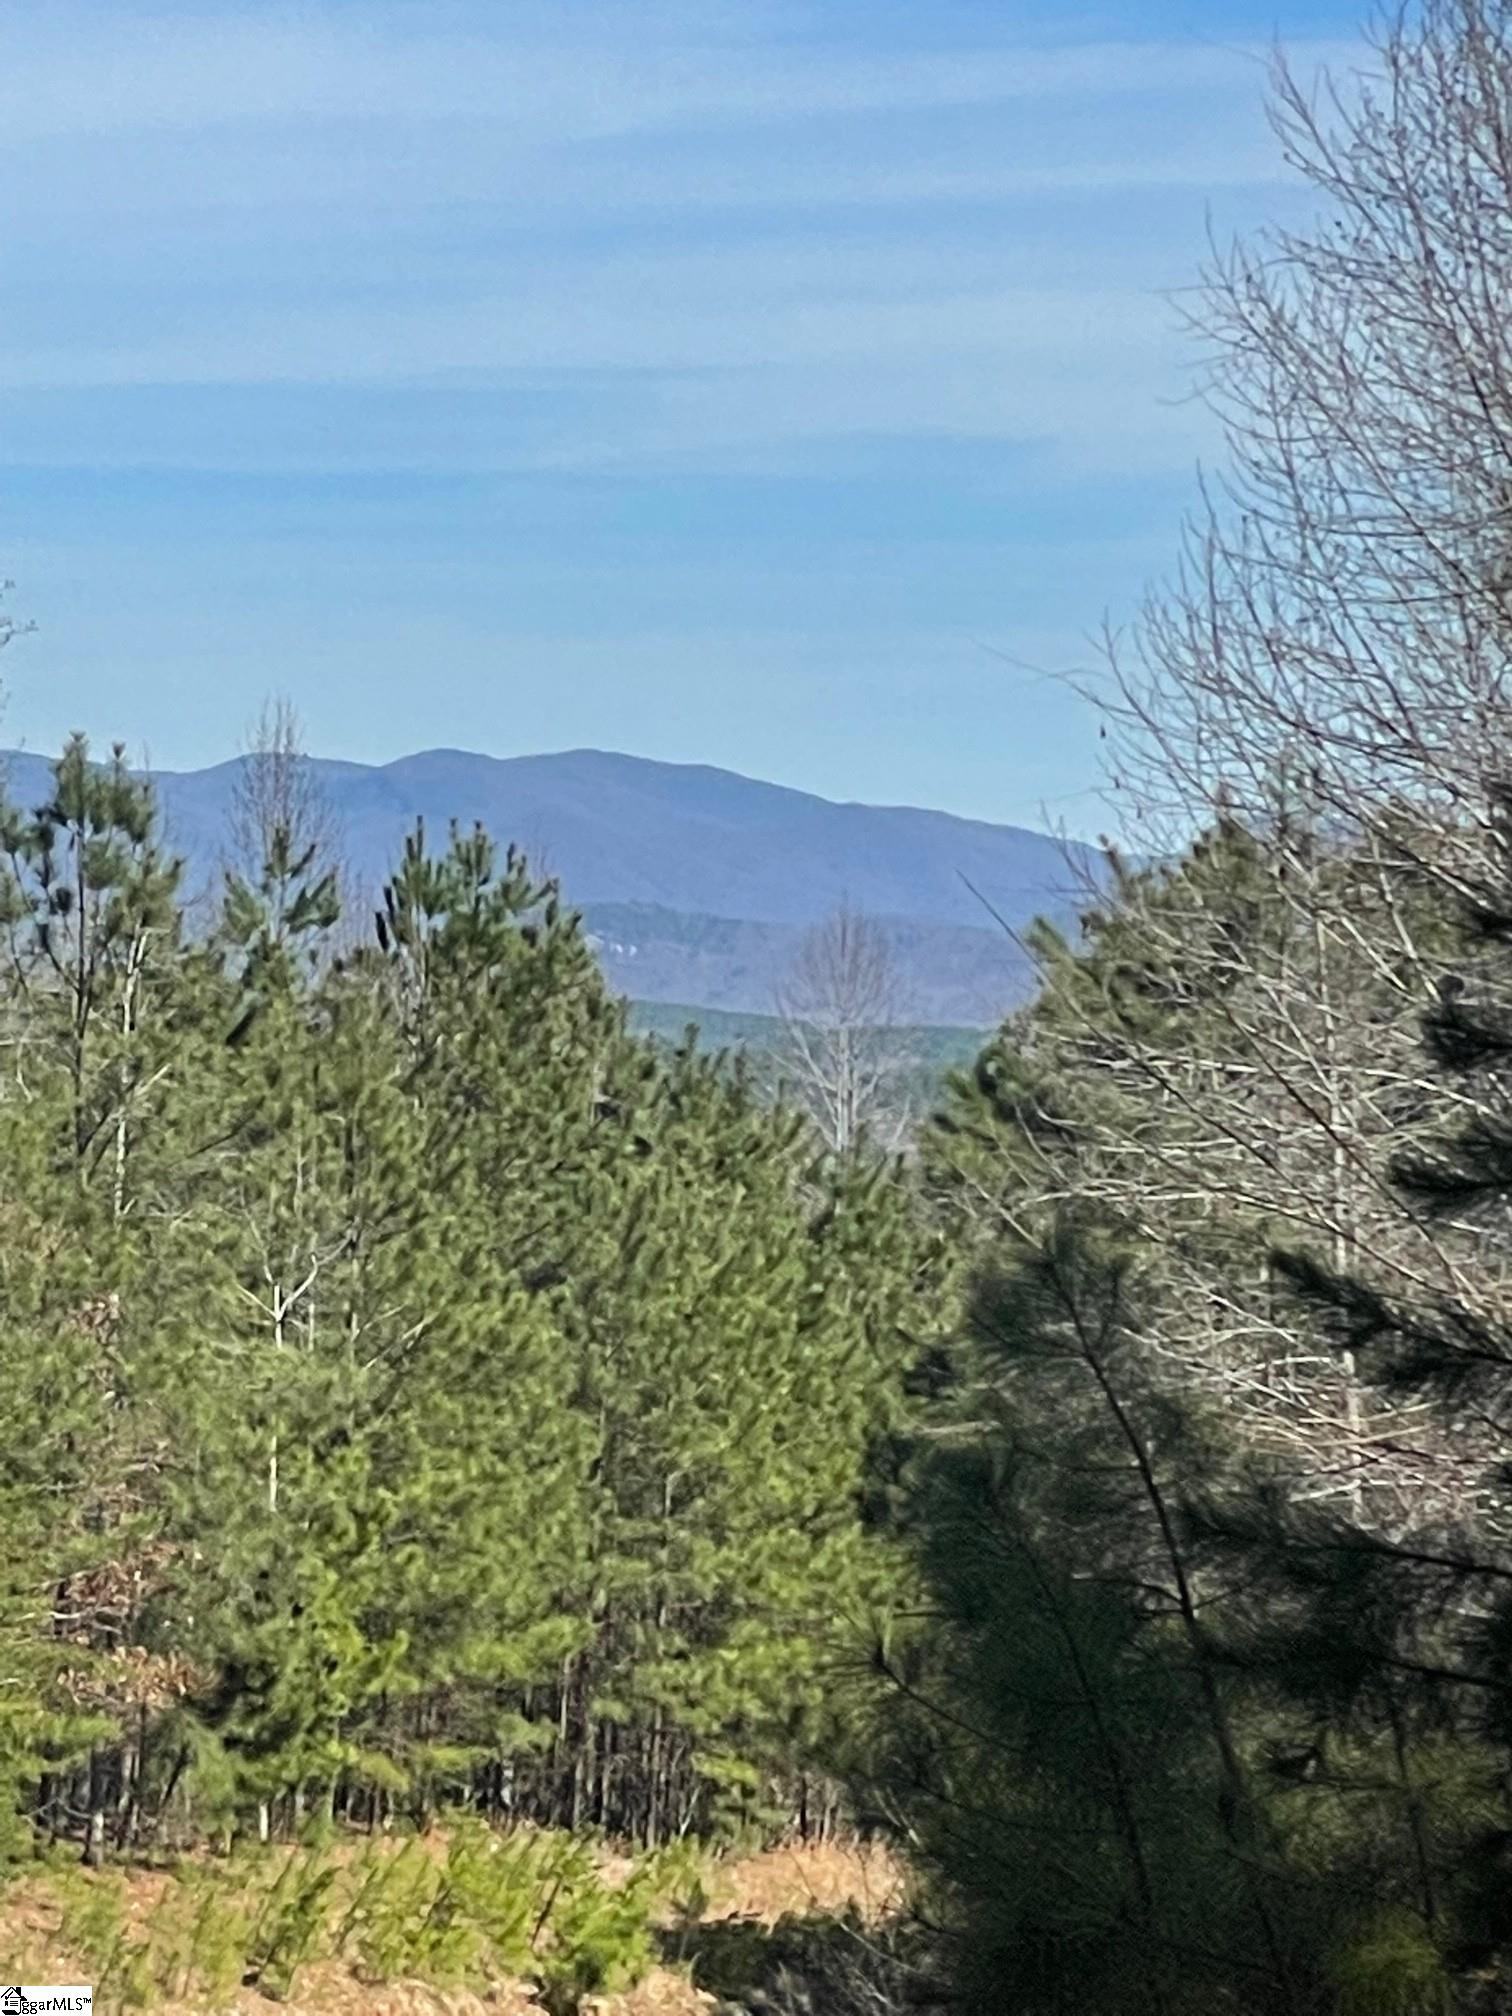 2+ acre estate lot (option for more acreage) with nice building envelope for main and lower level home.  View of mountains from drive entrance and seasonal mountain peaks view through trees during winter. This lot is less than 1/2 mile inside the main Springs gate affording easy access and egress to community amenities as well as nearby towns, only 15 minutes to Clemson. Great lot for access to the many amenities offered by the Cliffs at Keowee Springs.  If seeking a larger estate parcel, call listing agent about adjoining lots which could be packaged for a larger parcel.  Cliffs membership available for separate purchase.